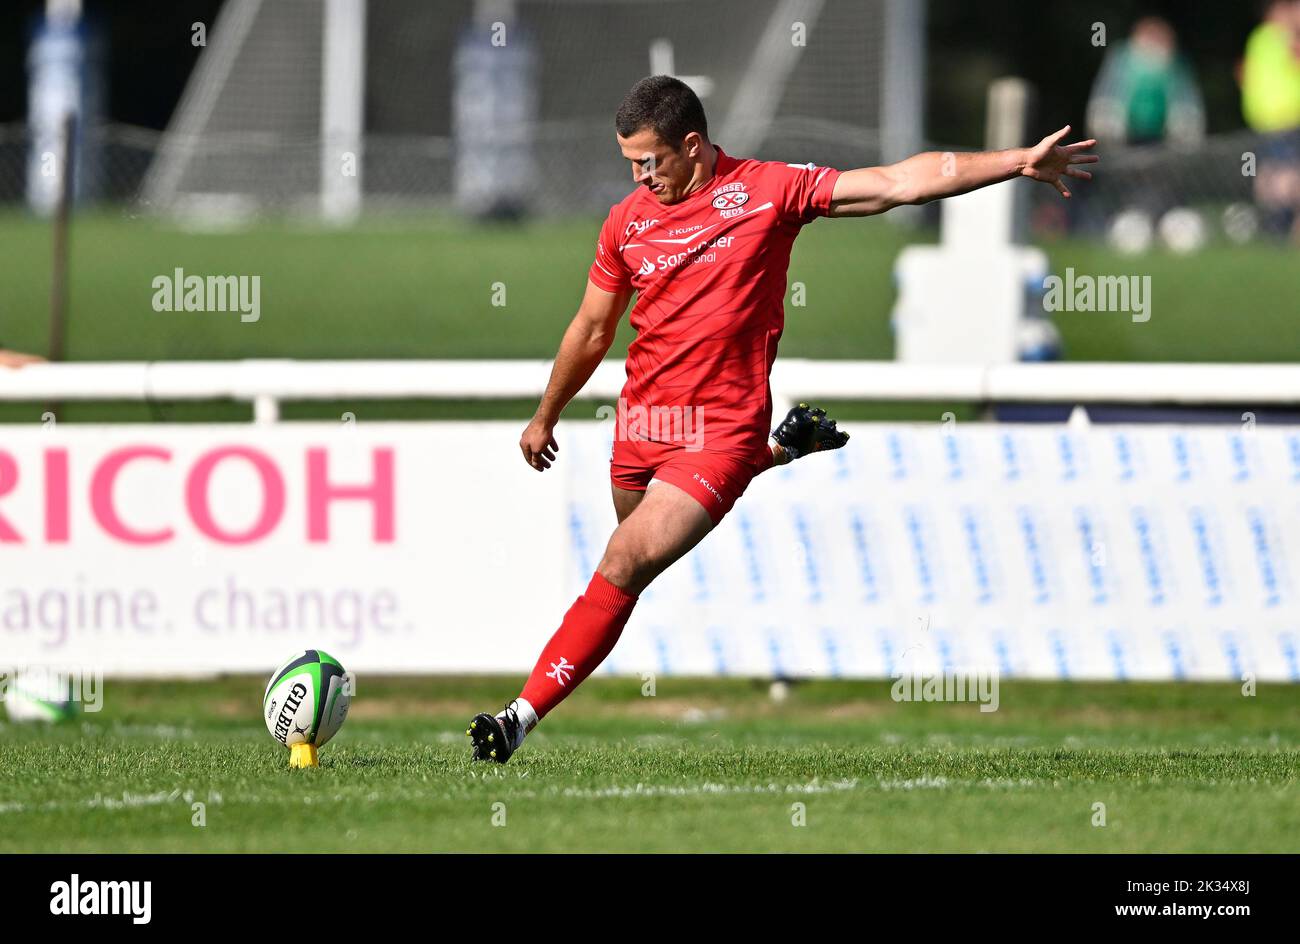 Richmond, United Kingdom. 24th Sep, 2022. Championship Rugby. London Scottish V Jersey Reds. The Richmond Athletic Ground. Richmond. Russell Bennett (Jersey Reds) kicks during the London Scottish V Jersey Reds championship rugby match. Credit: Sport In Pictures/Alamy Live News Stock Photo